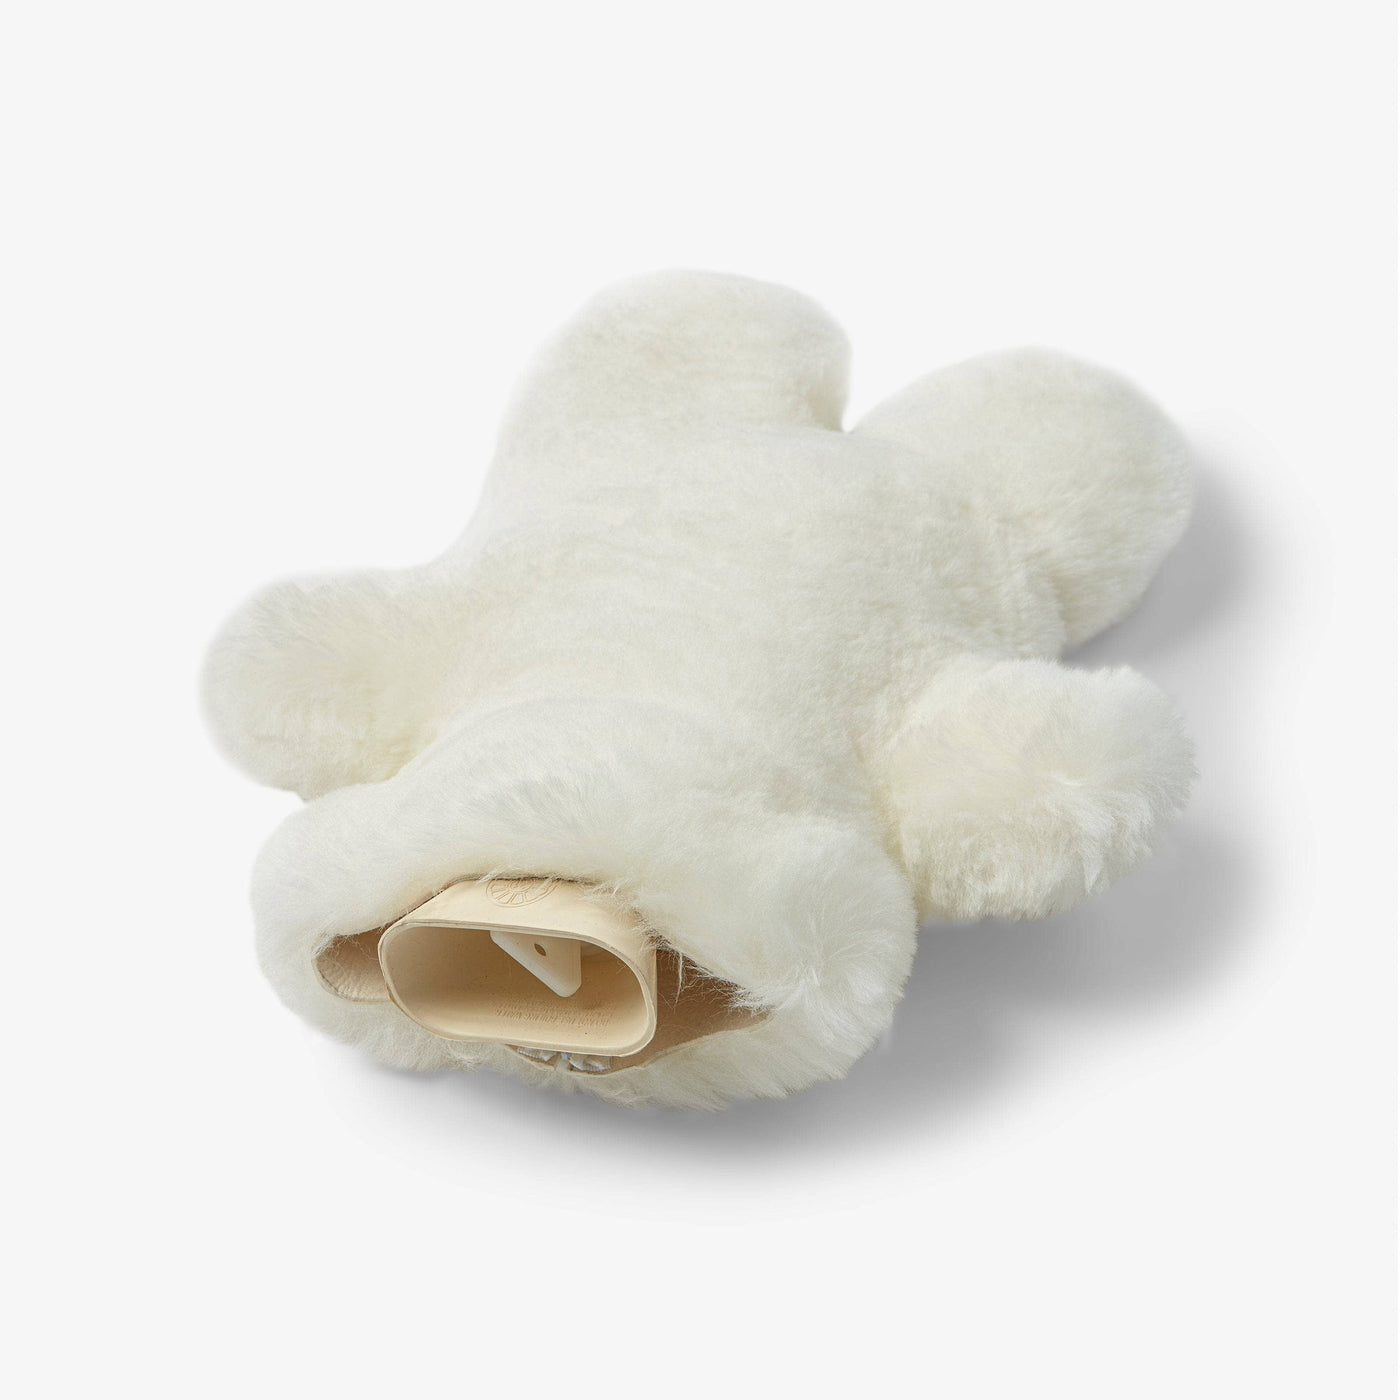 Modico Teddy Hot Water Bottle Cover, Ivory 4